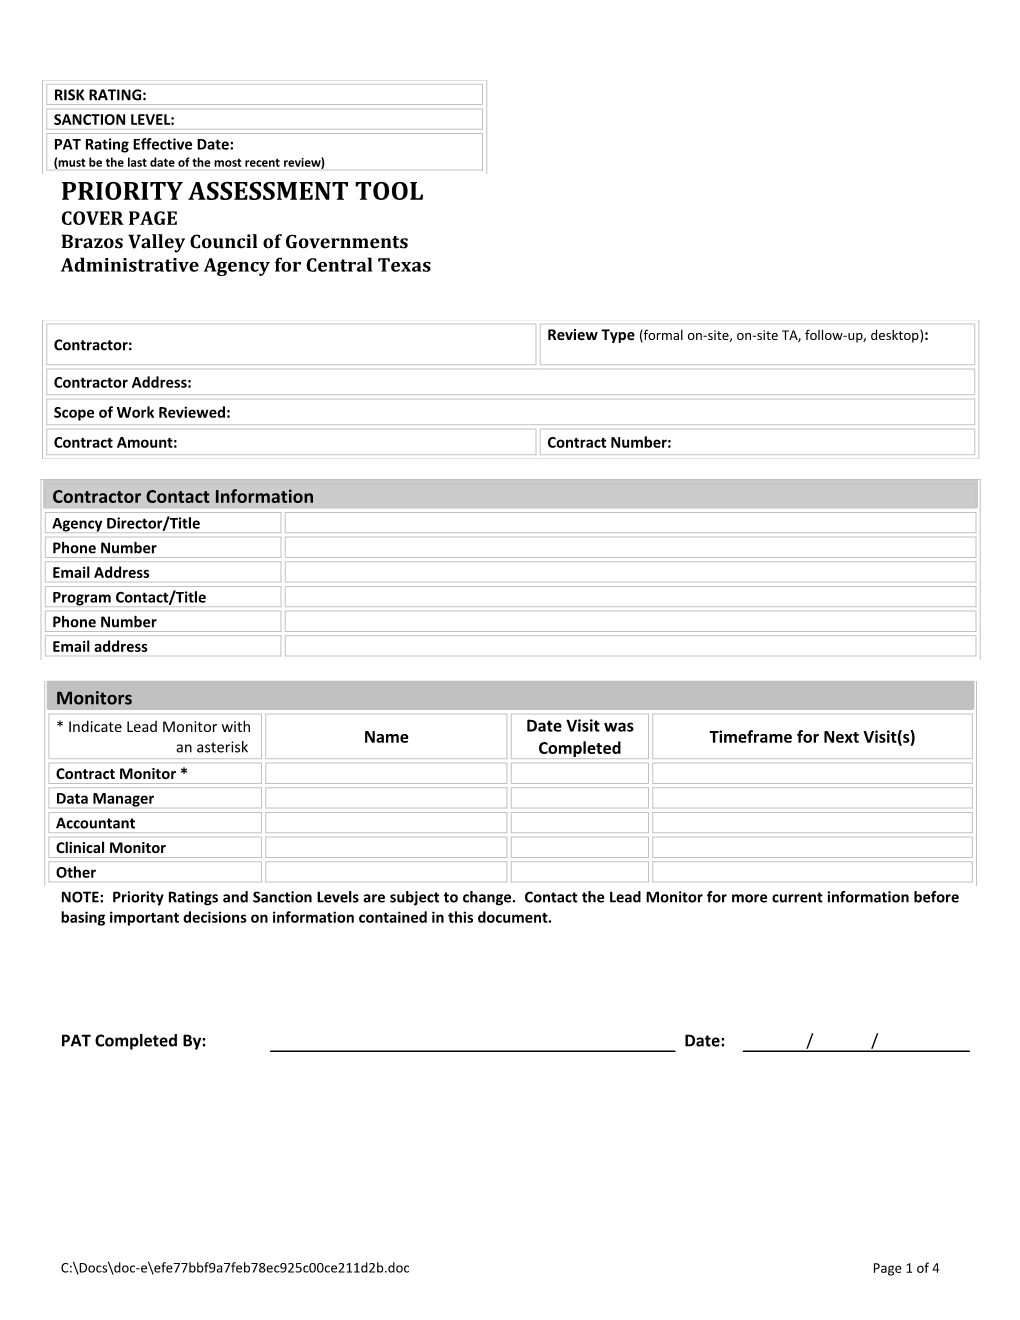 Completing the Contractor Priority Assessment Tool